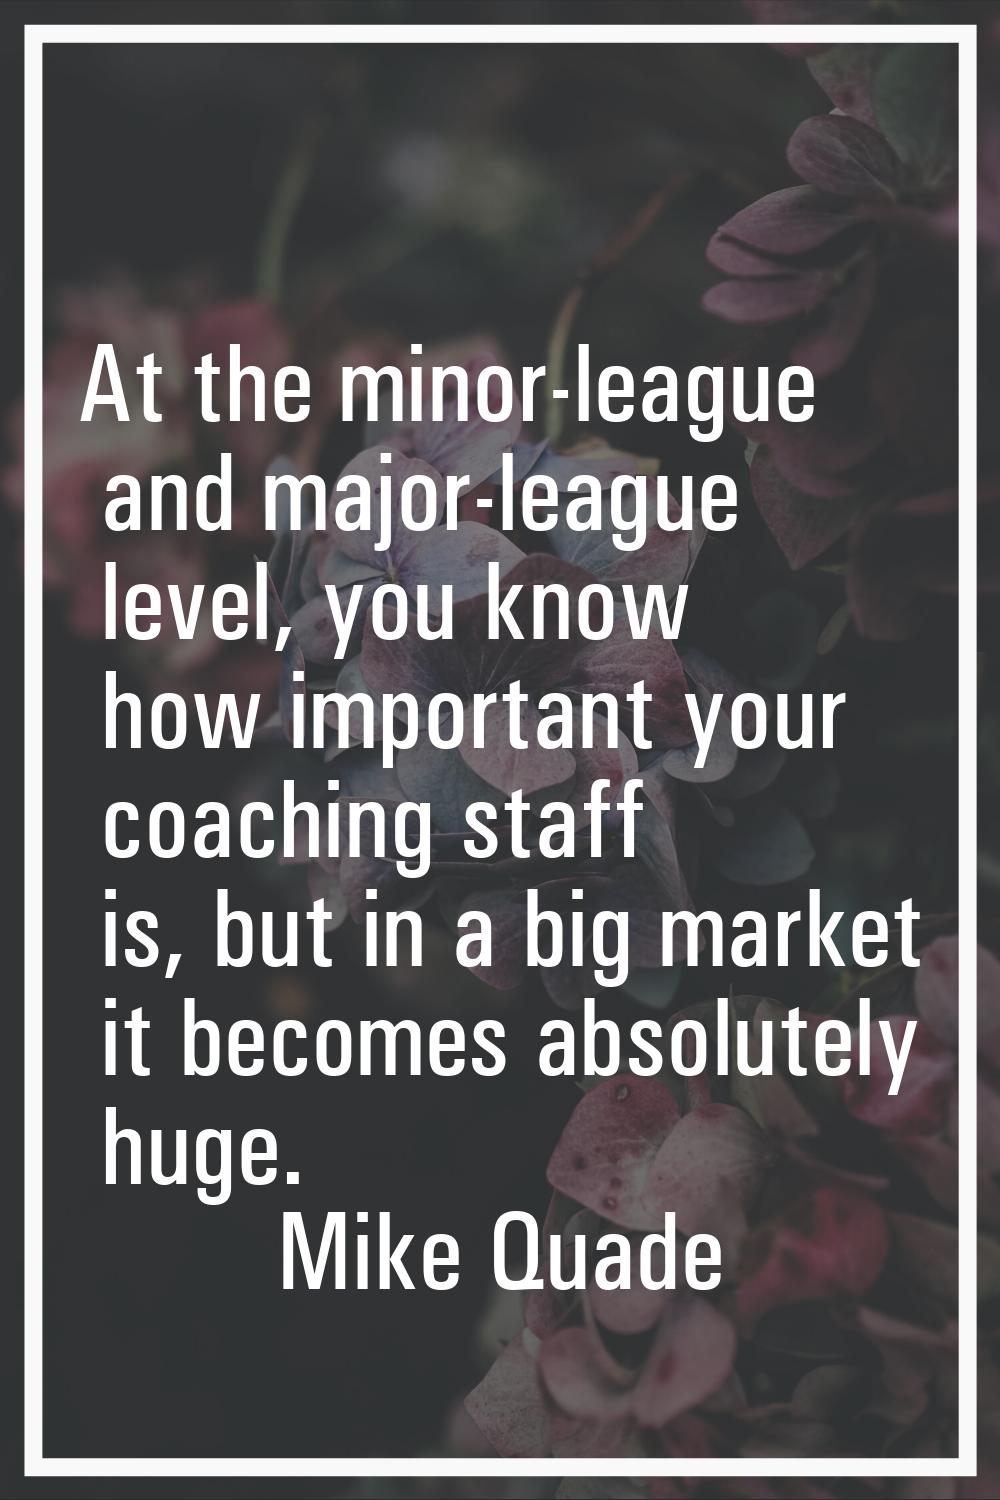 At the minor-league and major-league level, you know how important your coaching staff is, but in a